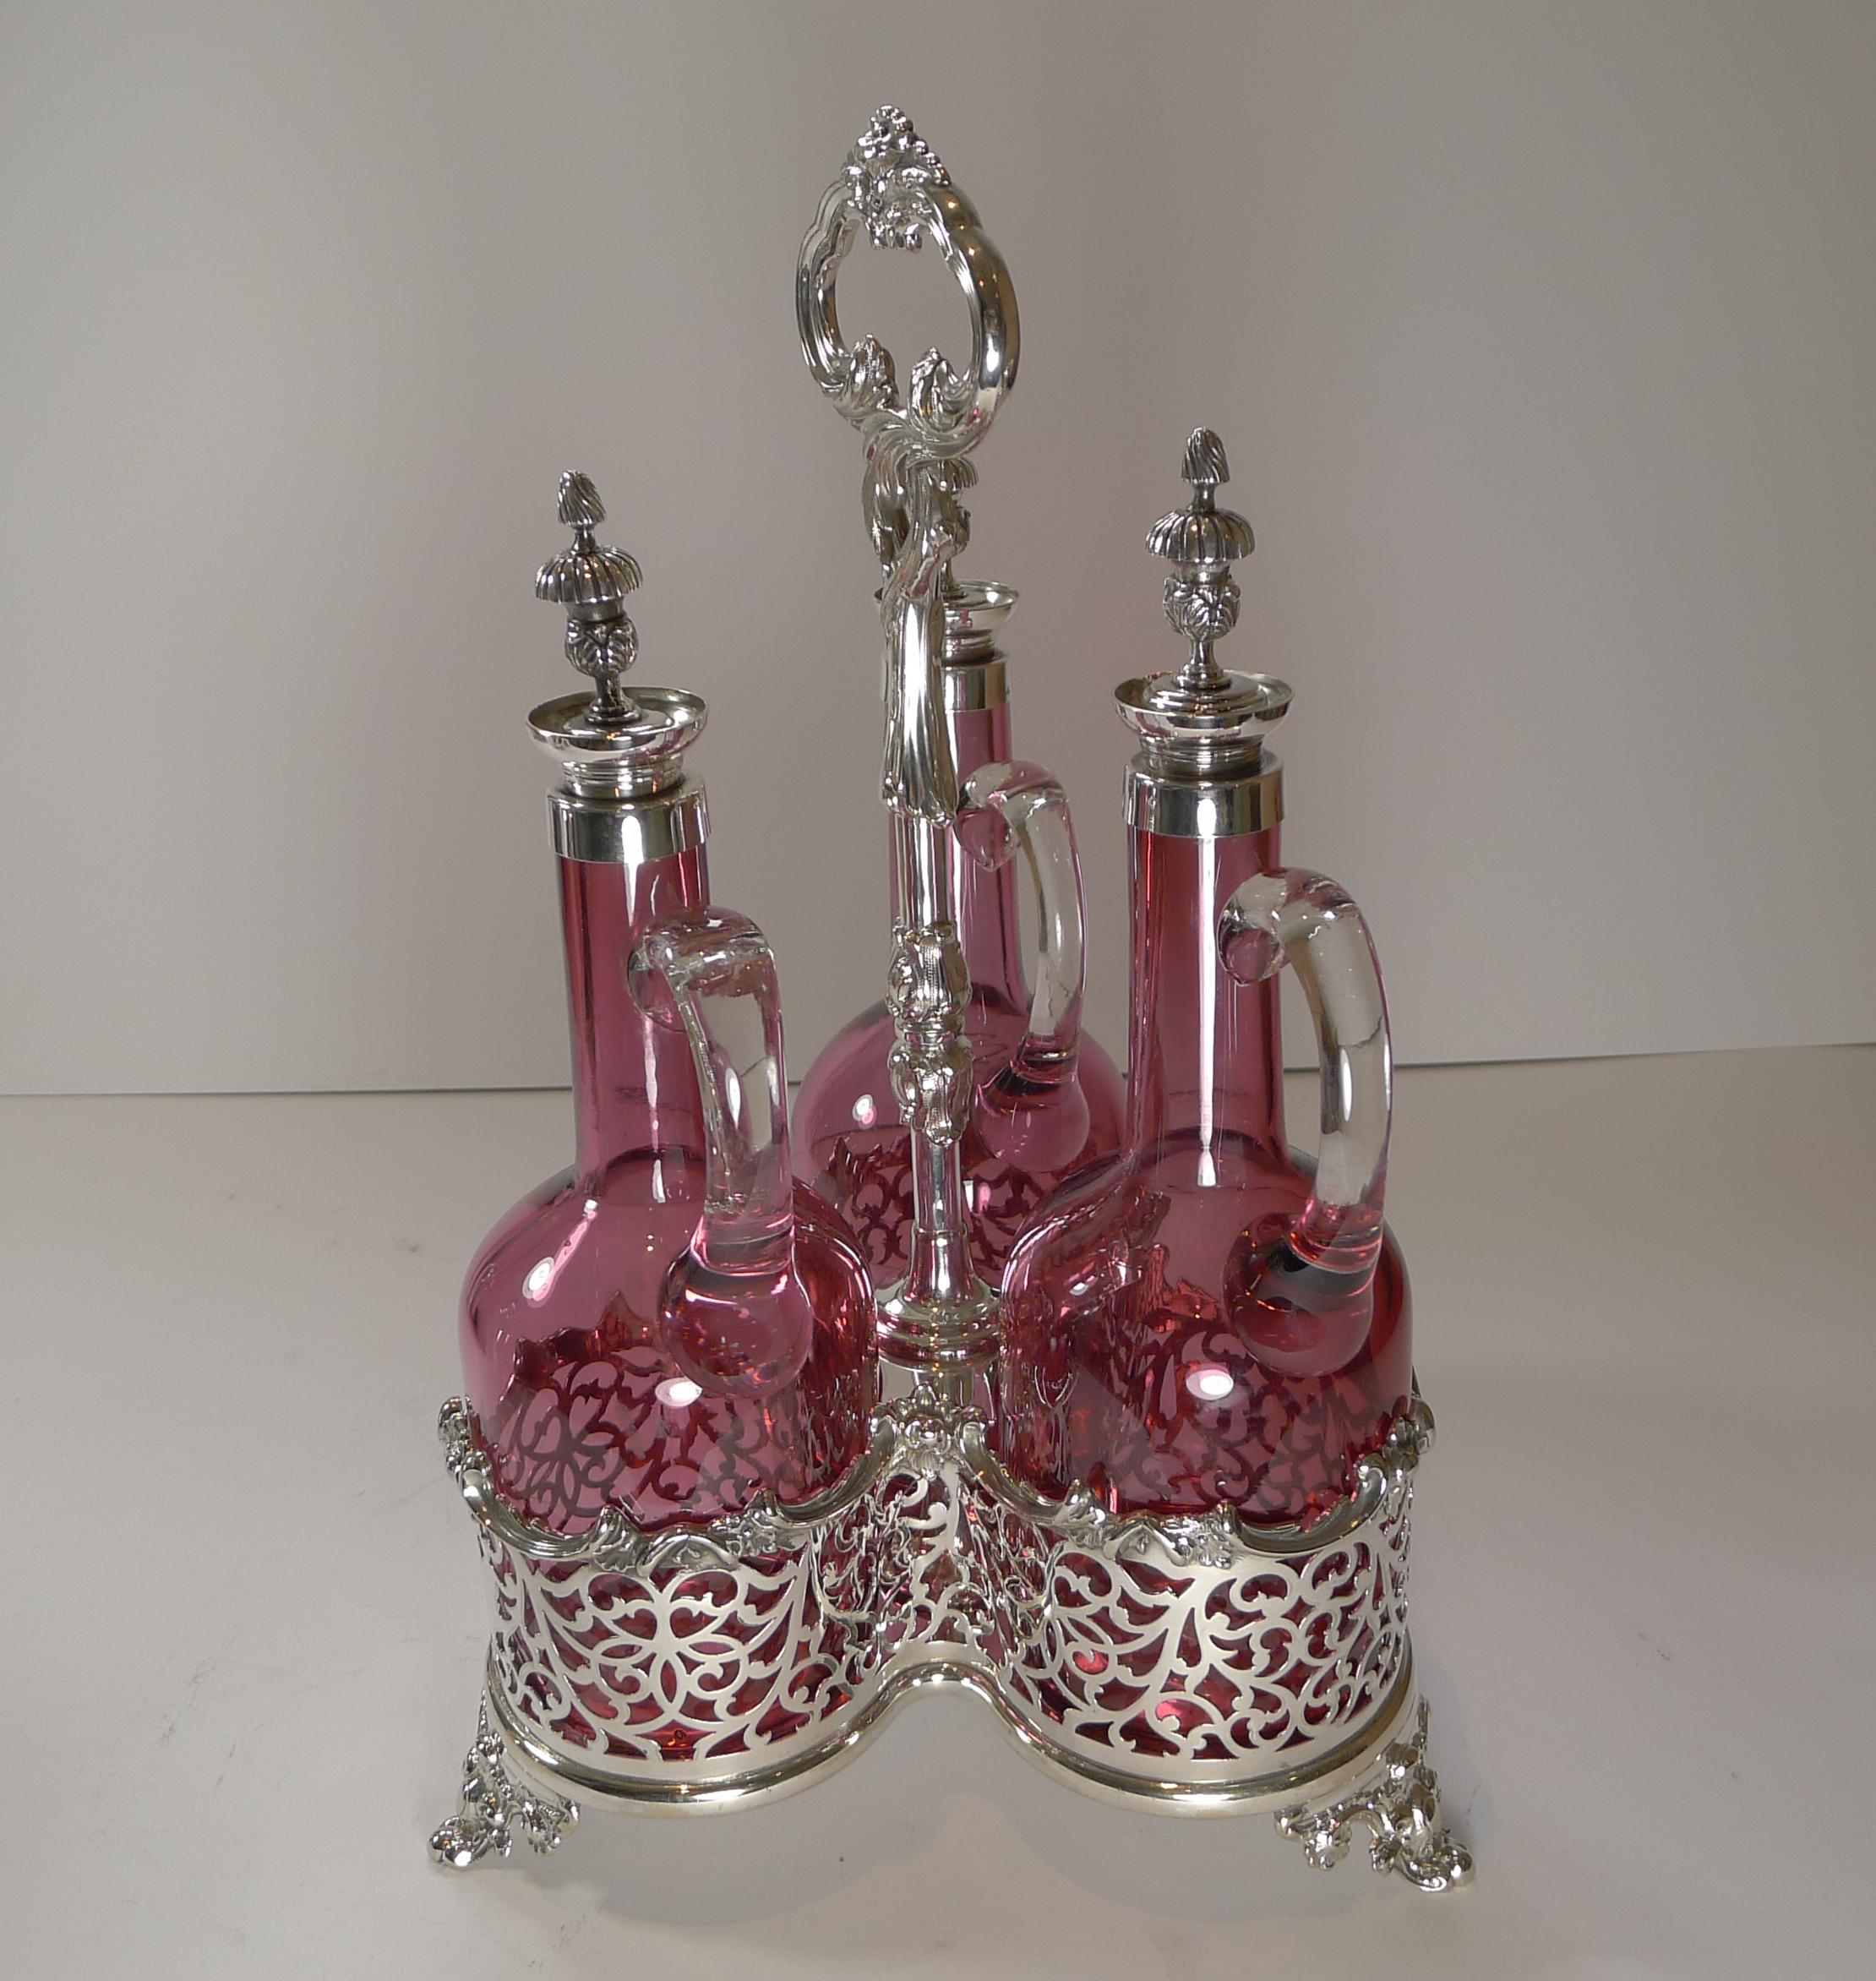 Stunning Cranberry Glass and Silver Plate Decanter Set c.1890 For Sale 7